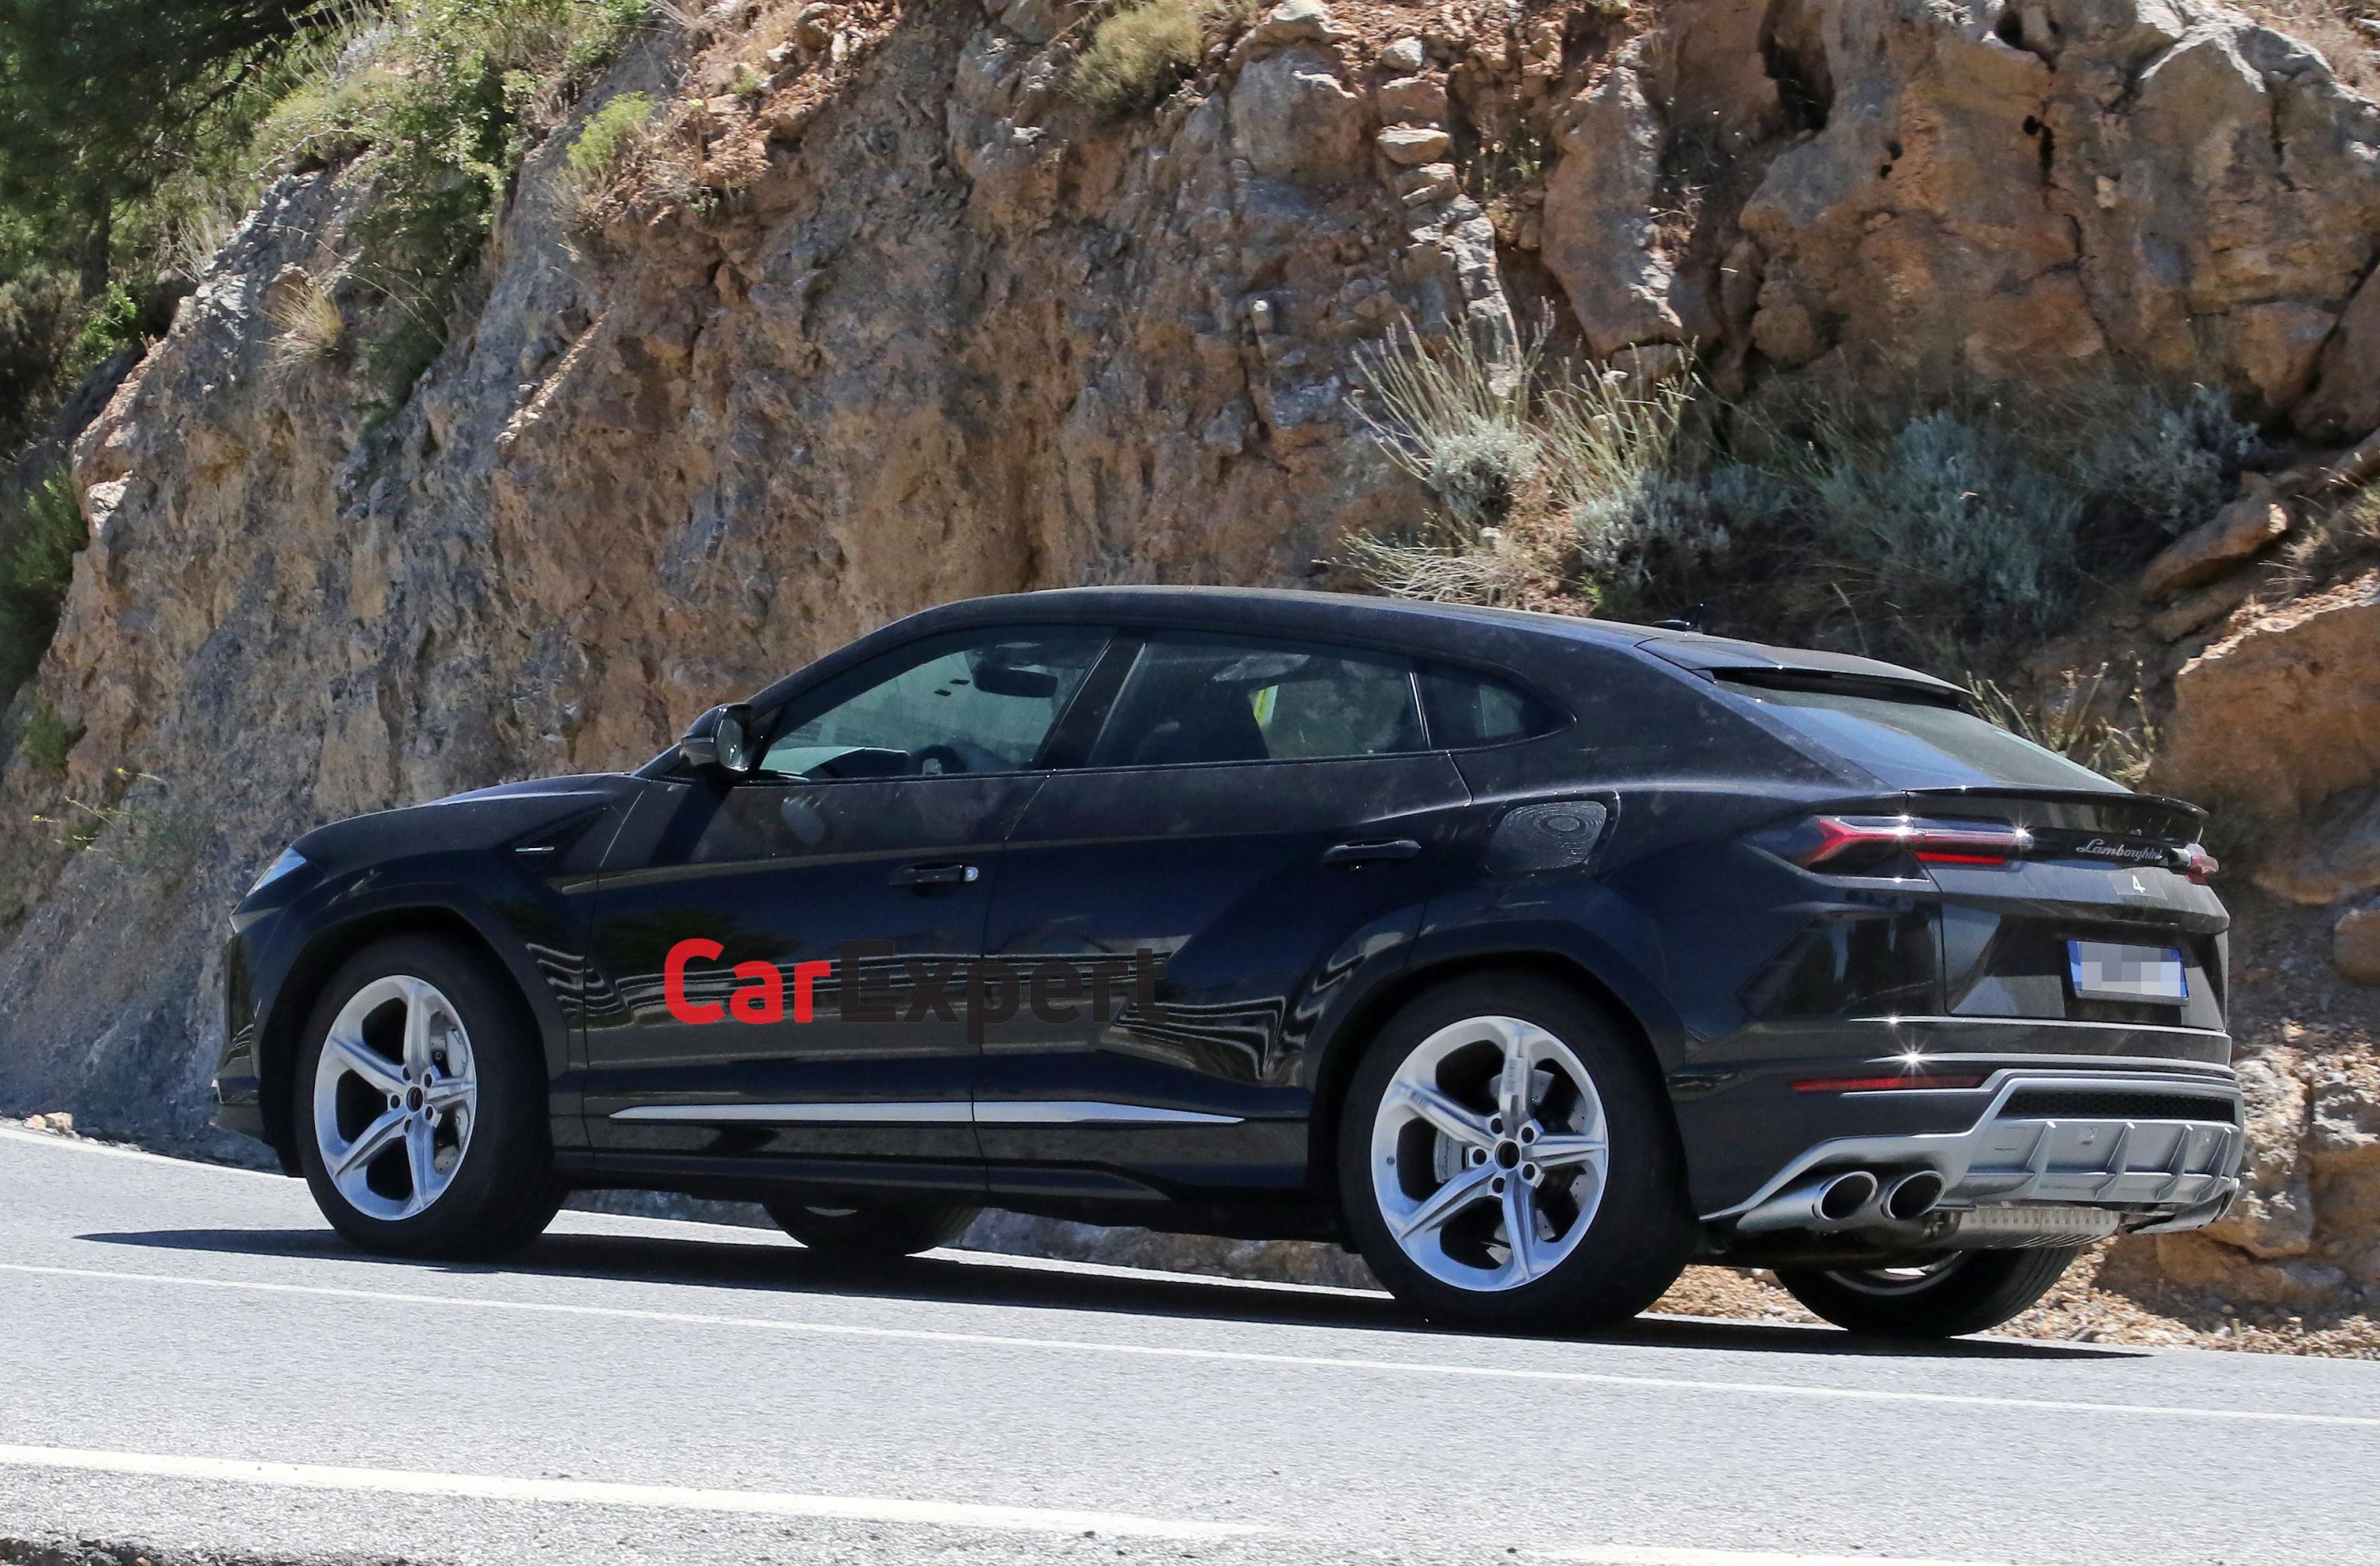 Lamborghini Urus Plug-In Hybrid Spied With Redesigned Front End